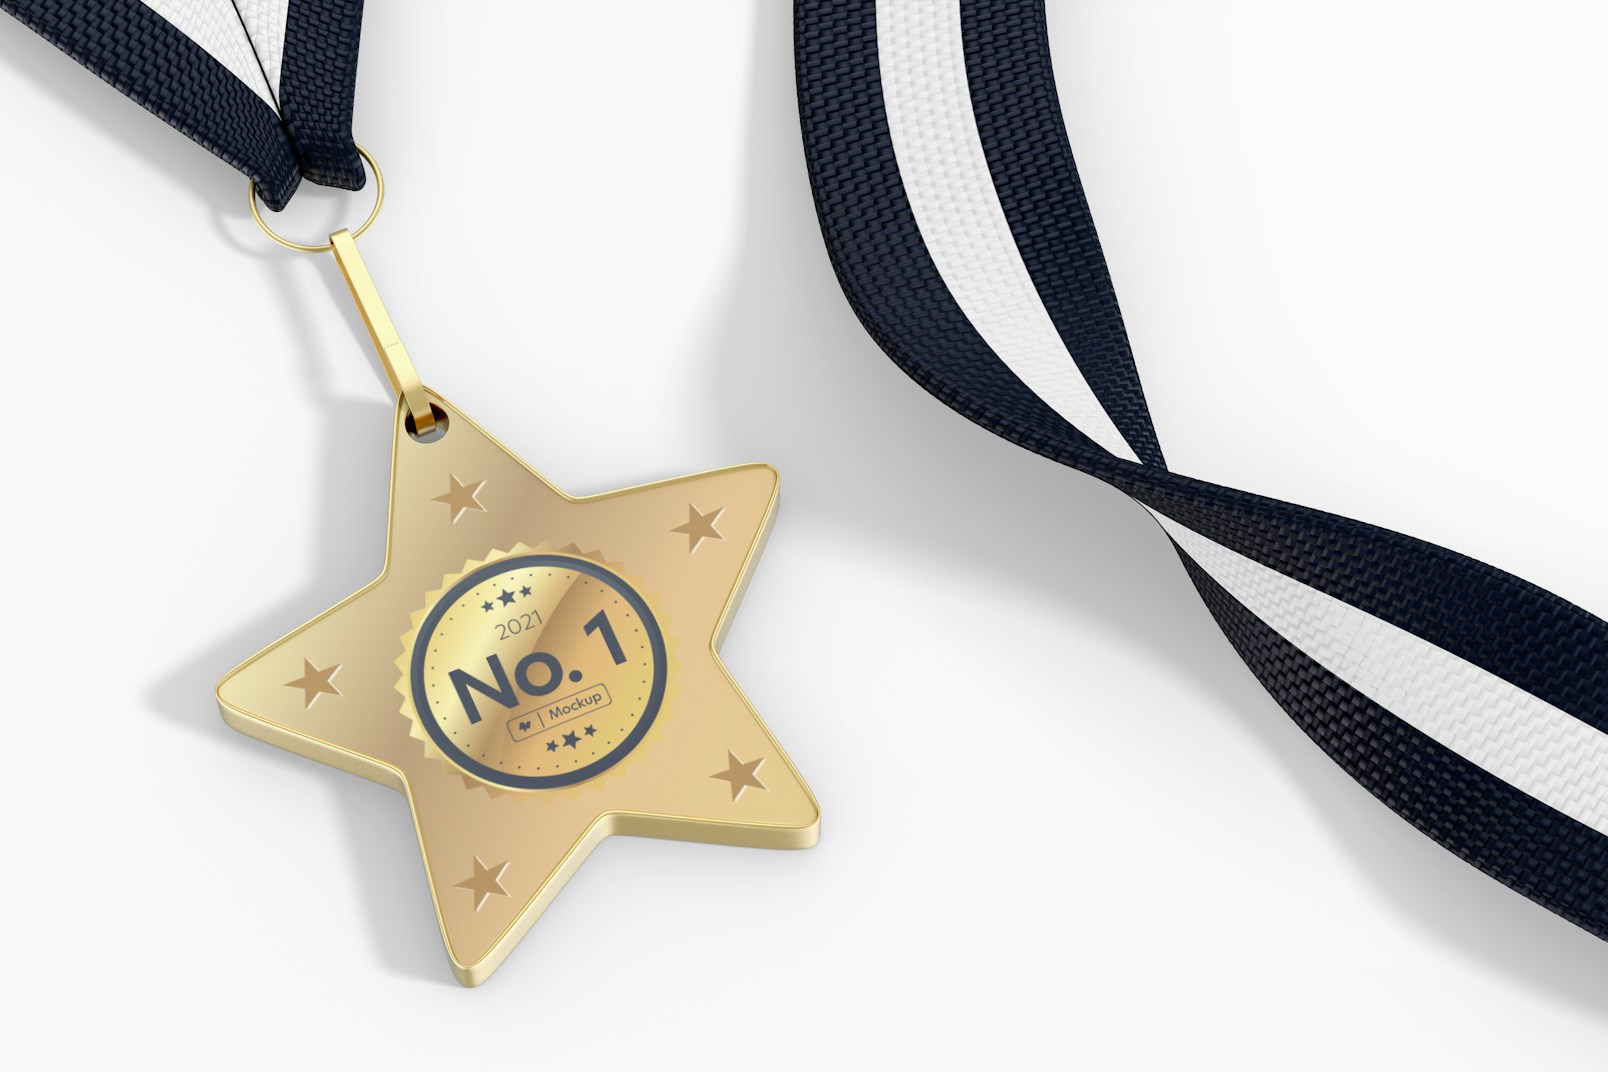 Star Competition Medal with Ribbon Mockup, Close Up